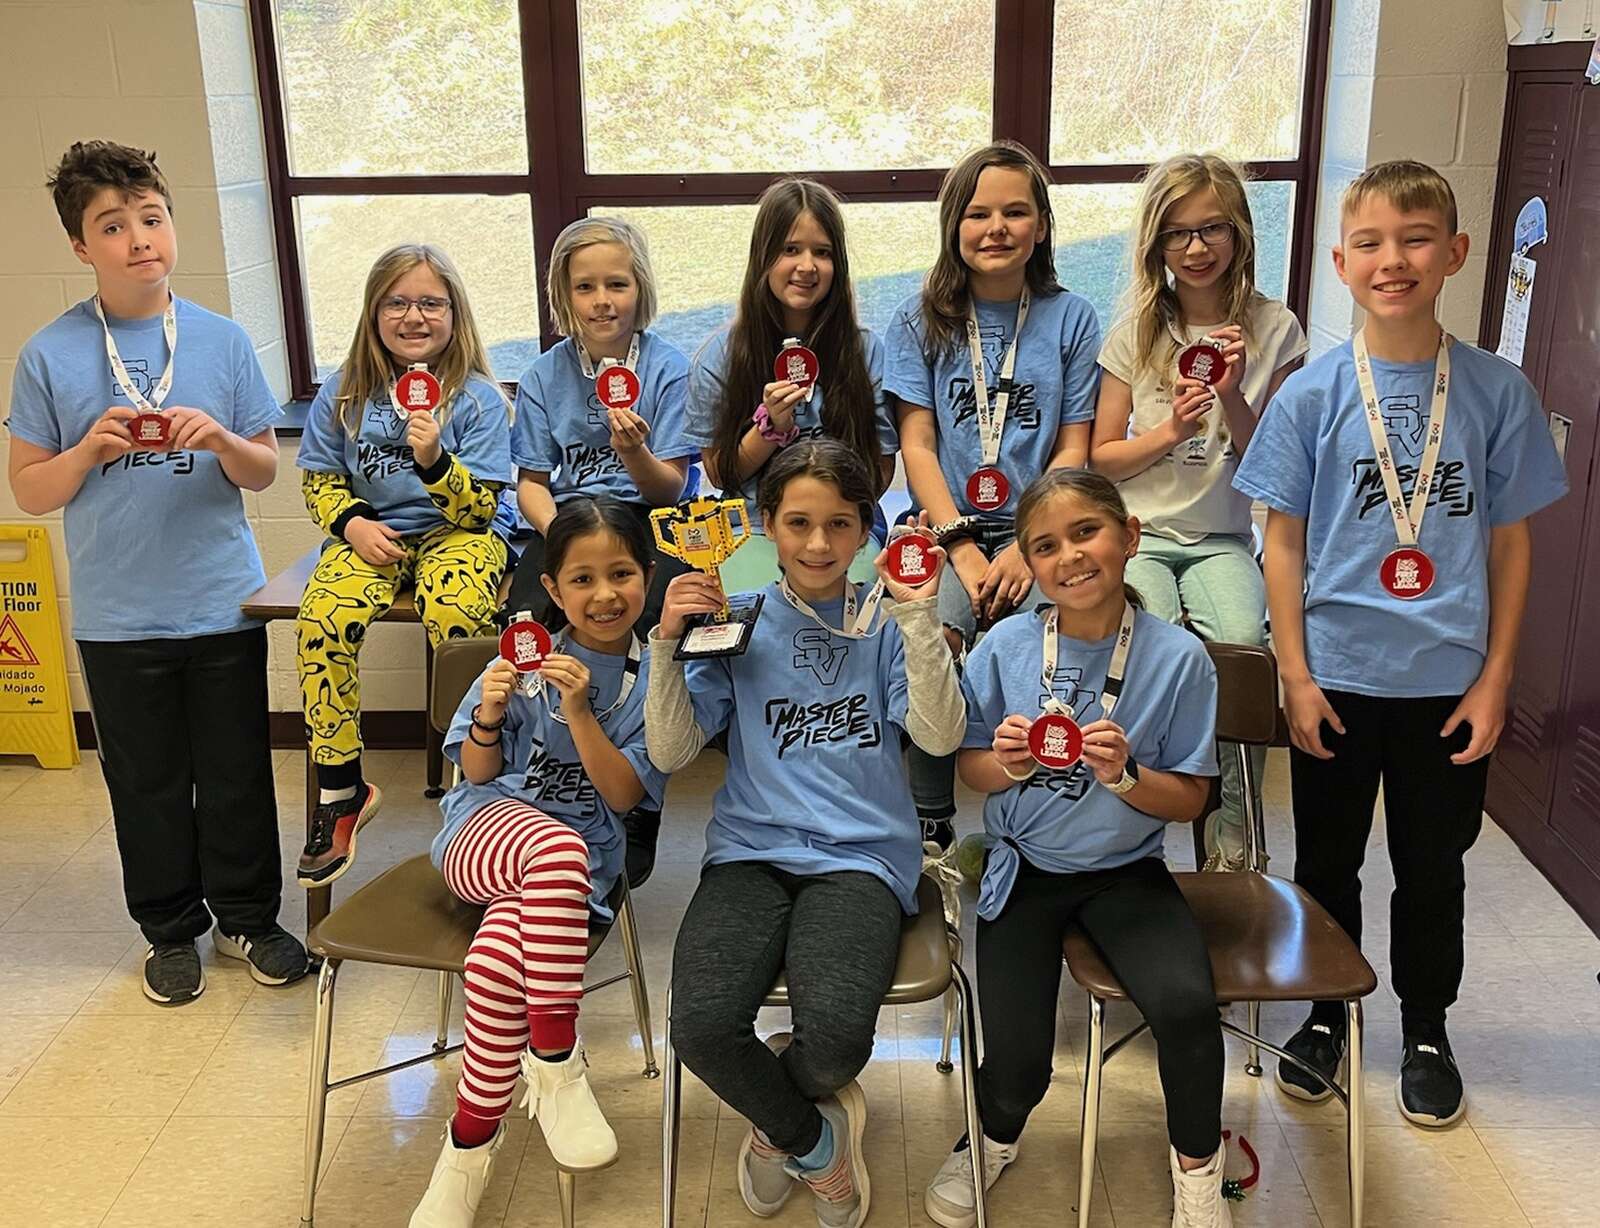 Seneca Valley’s FIRST Lego Lords team